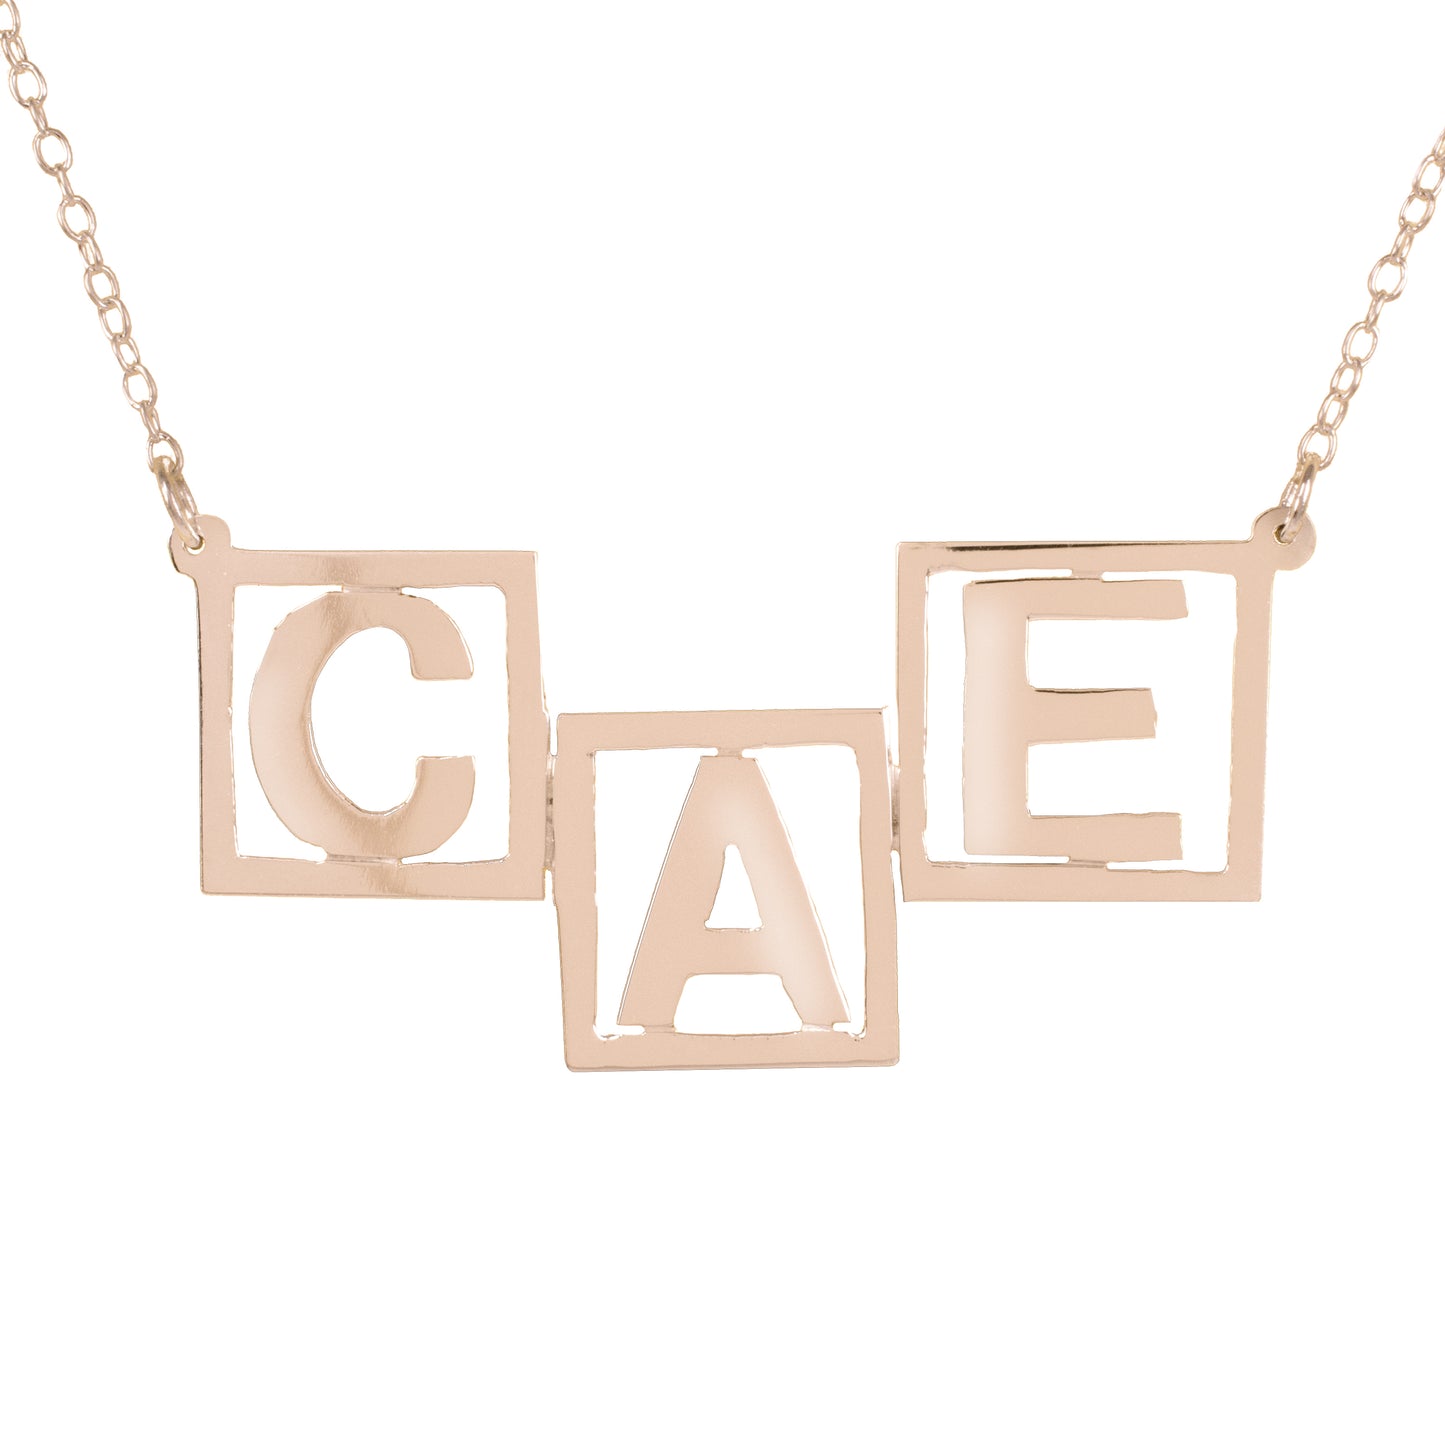 3 Initial Letter Name Necklace